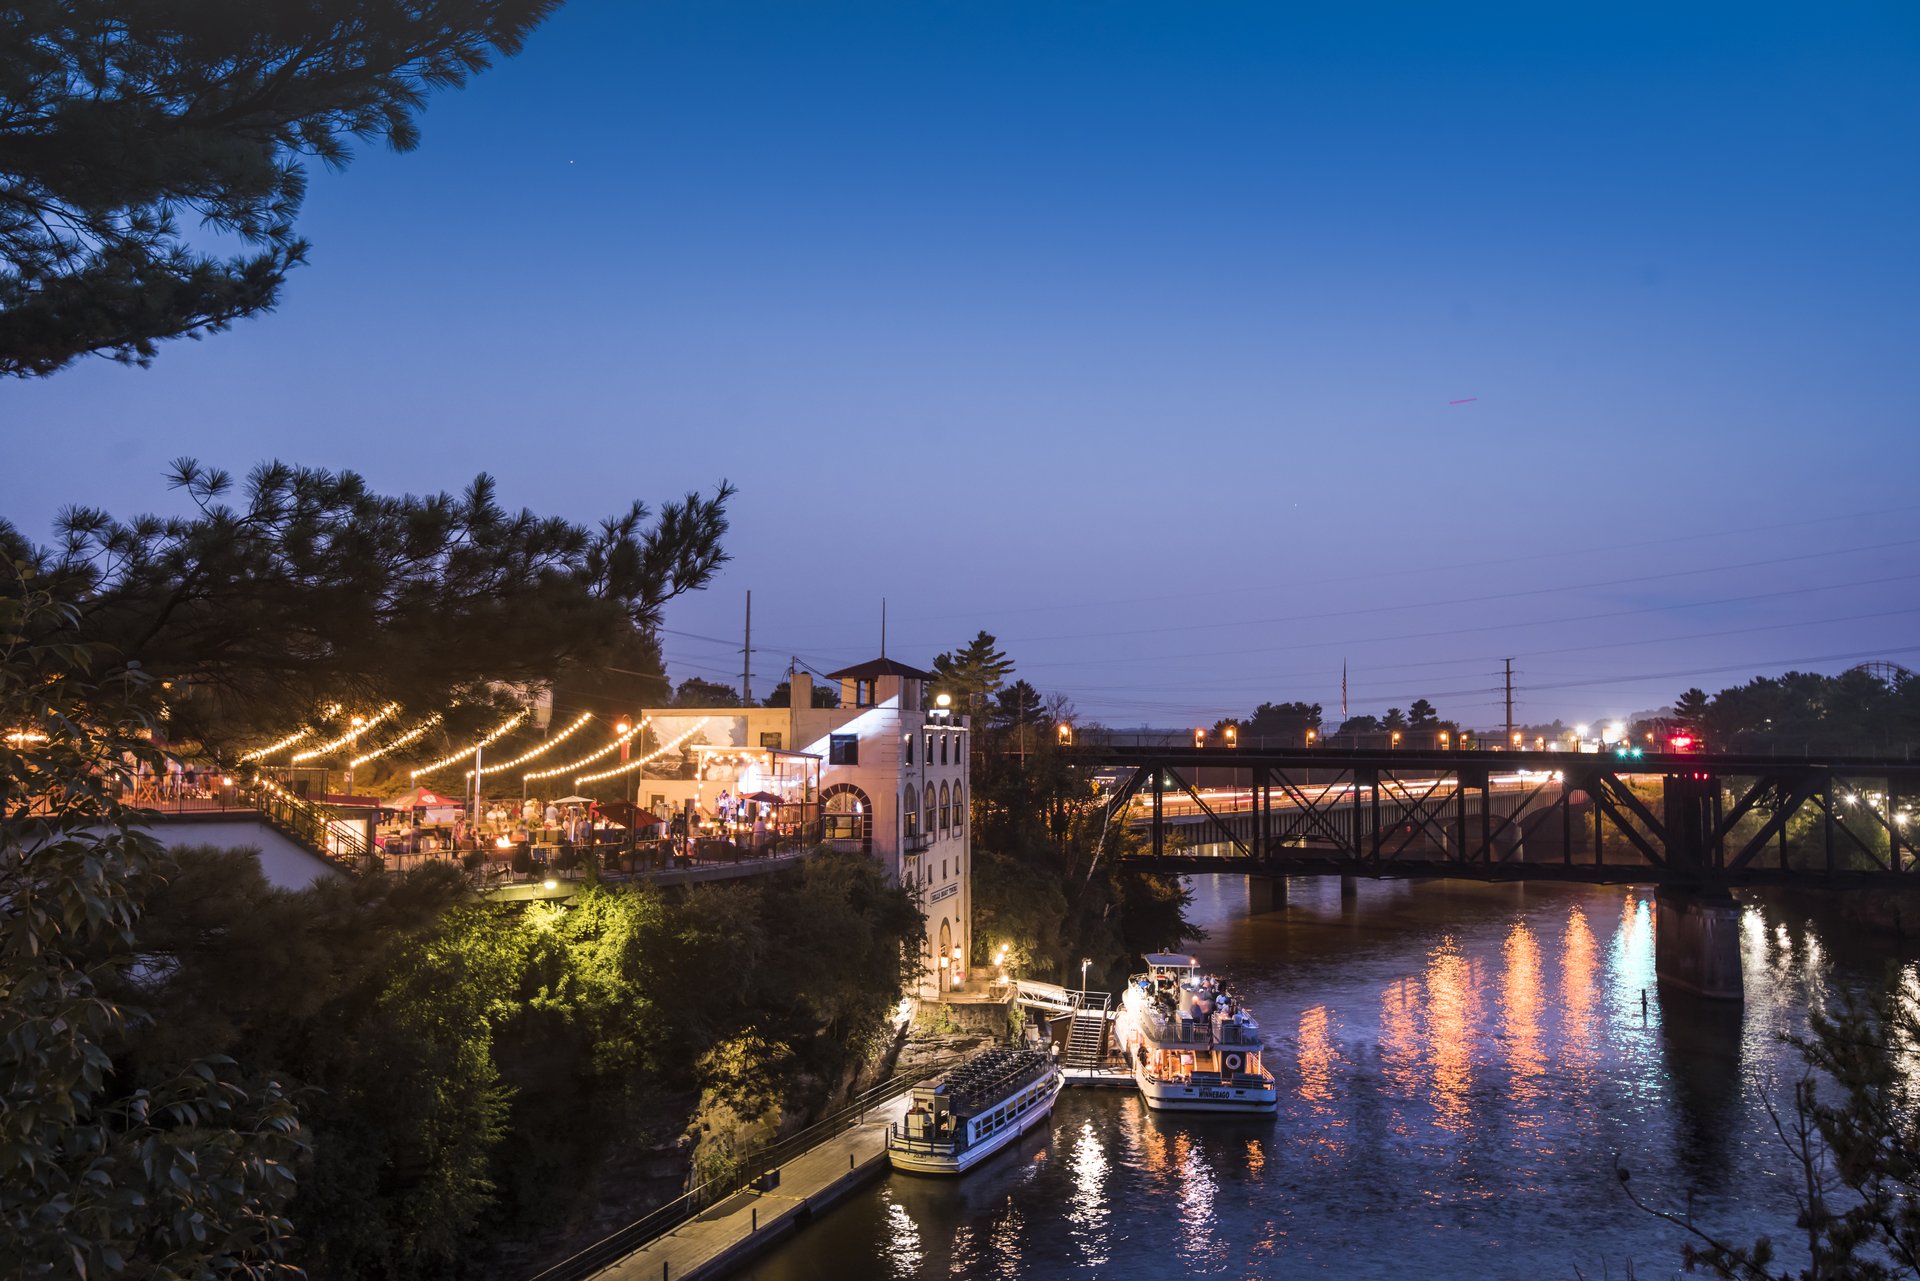 The Wisconsin Dells riverfront shines brightly during the evening hours.